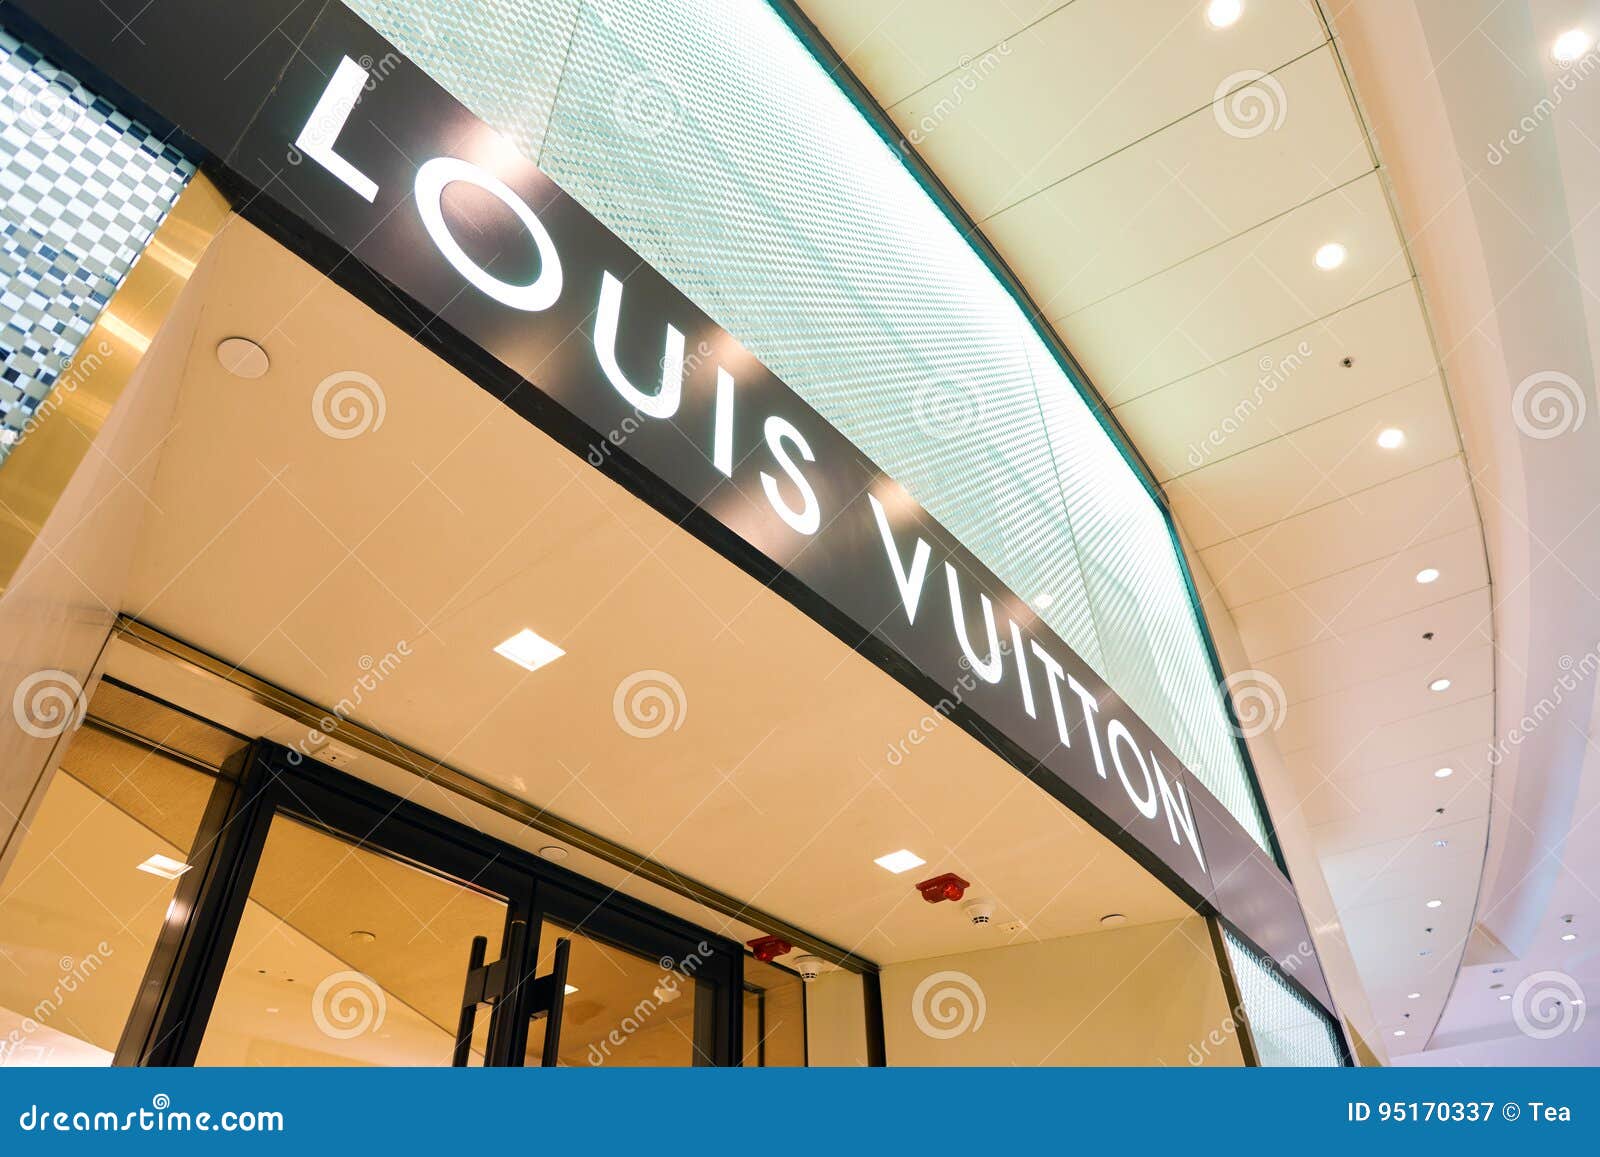 Louis Vuitton at Chengdu, China Editorial Photography - Image of luxurius,  glass: 231969512